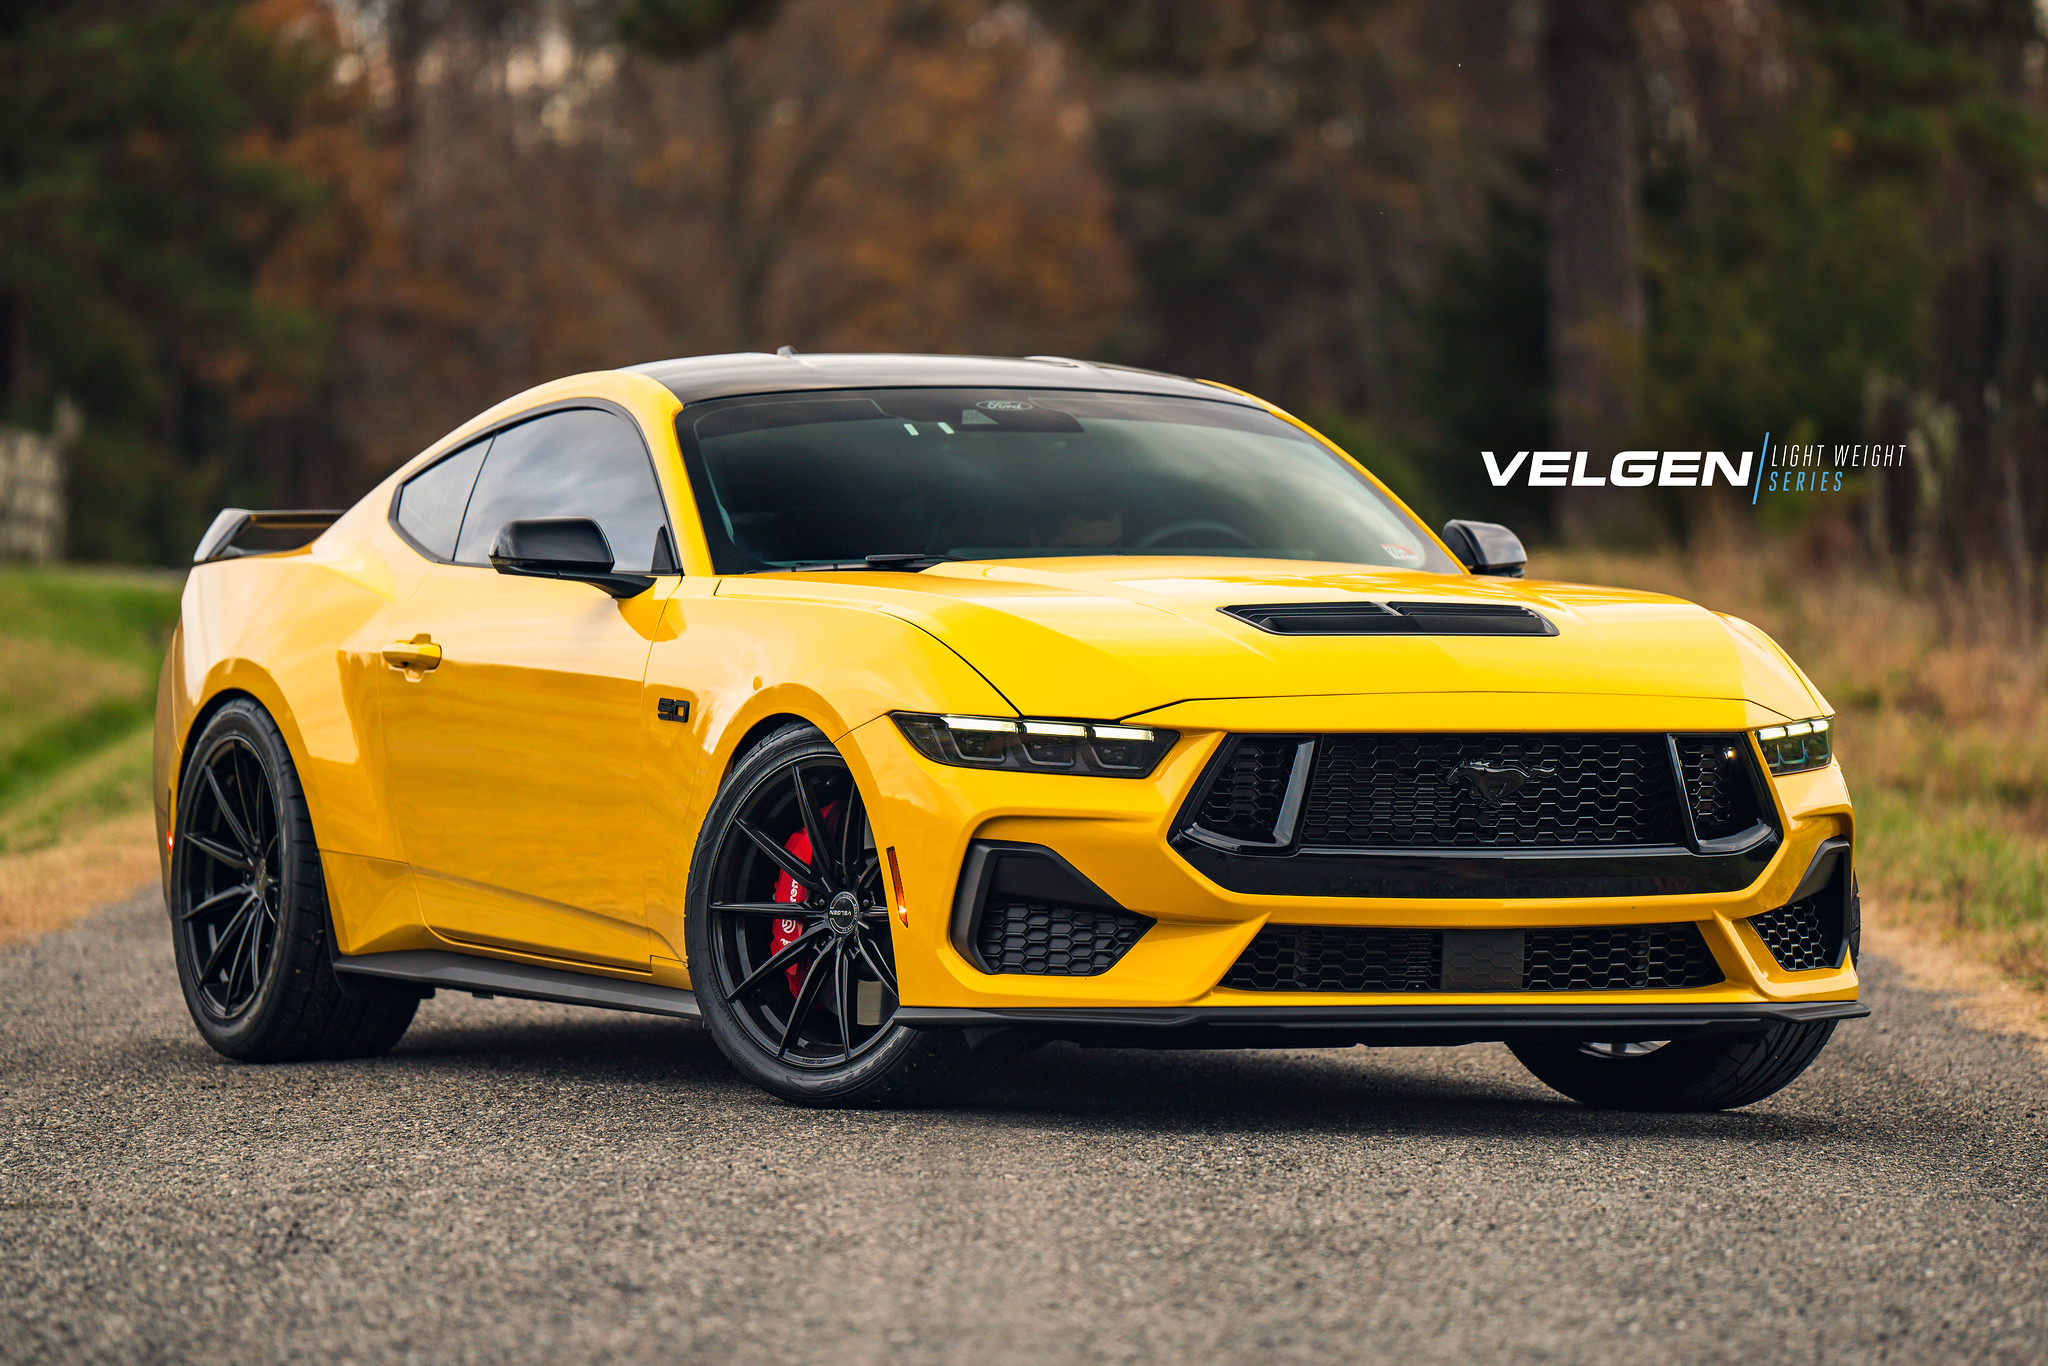 S650 Mustang Velgen wheels for your S650 Mustang | Vibe Motorsports 53362895894_226db70a03_k